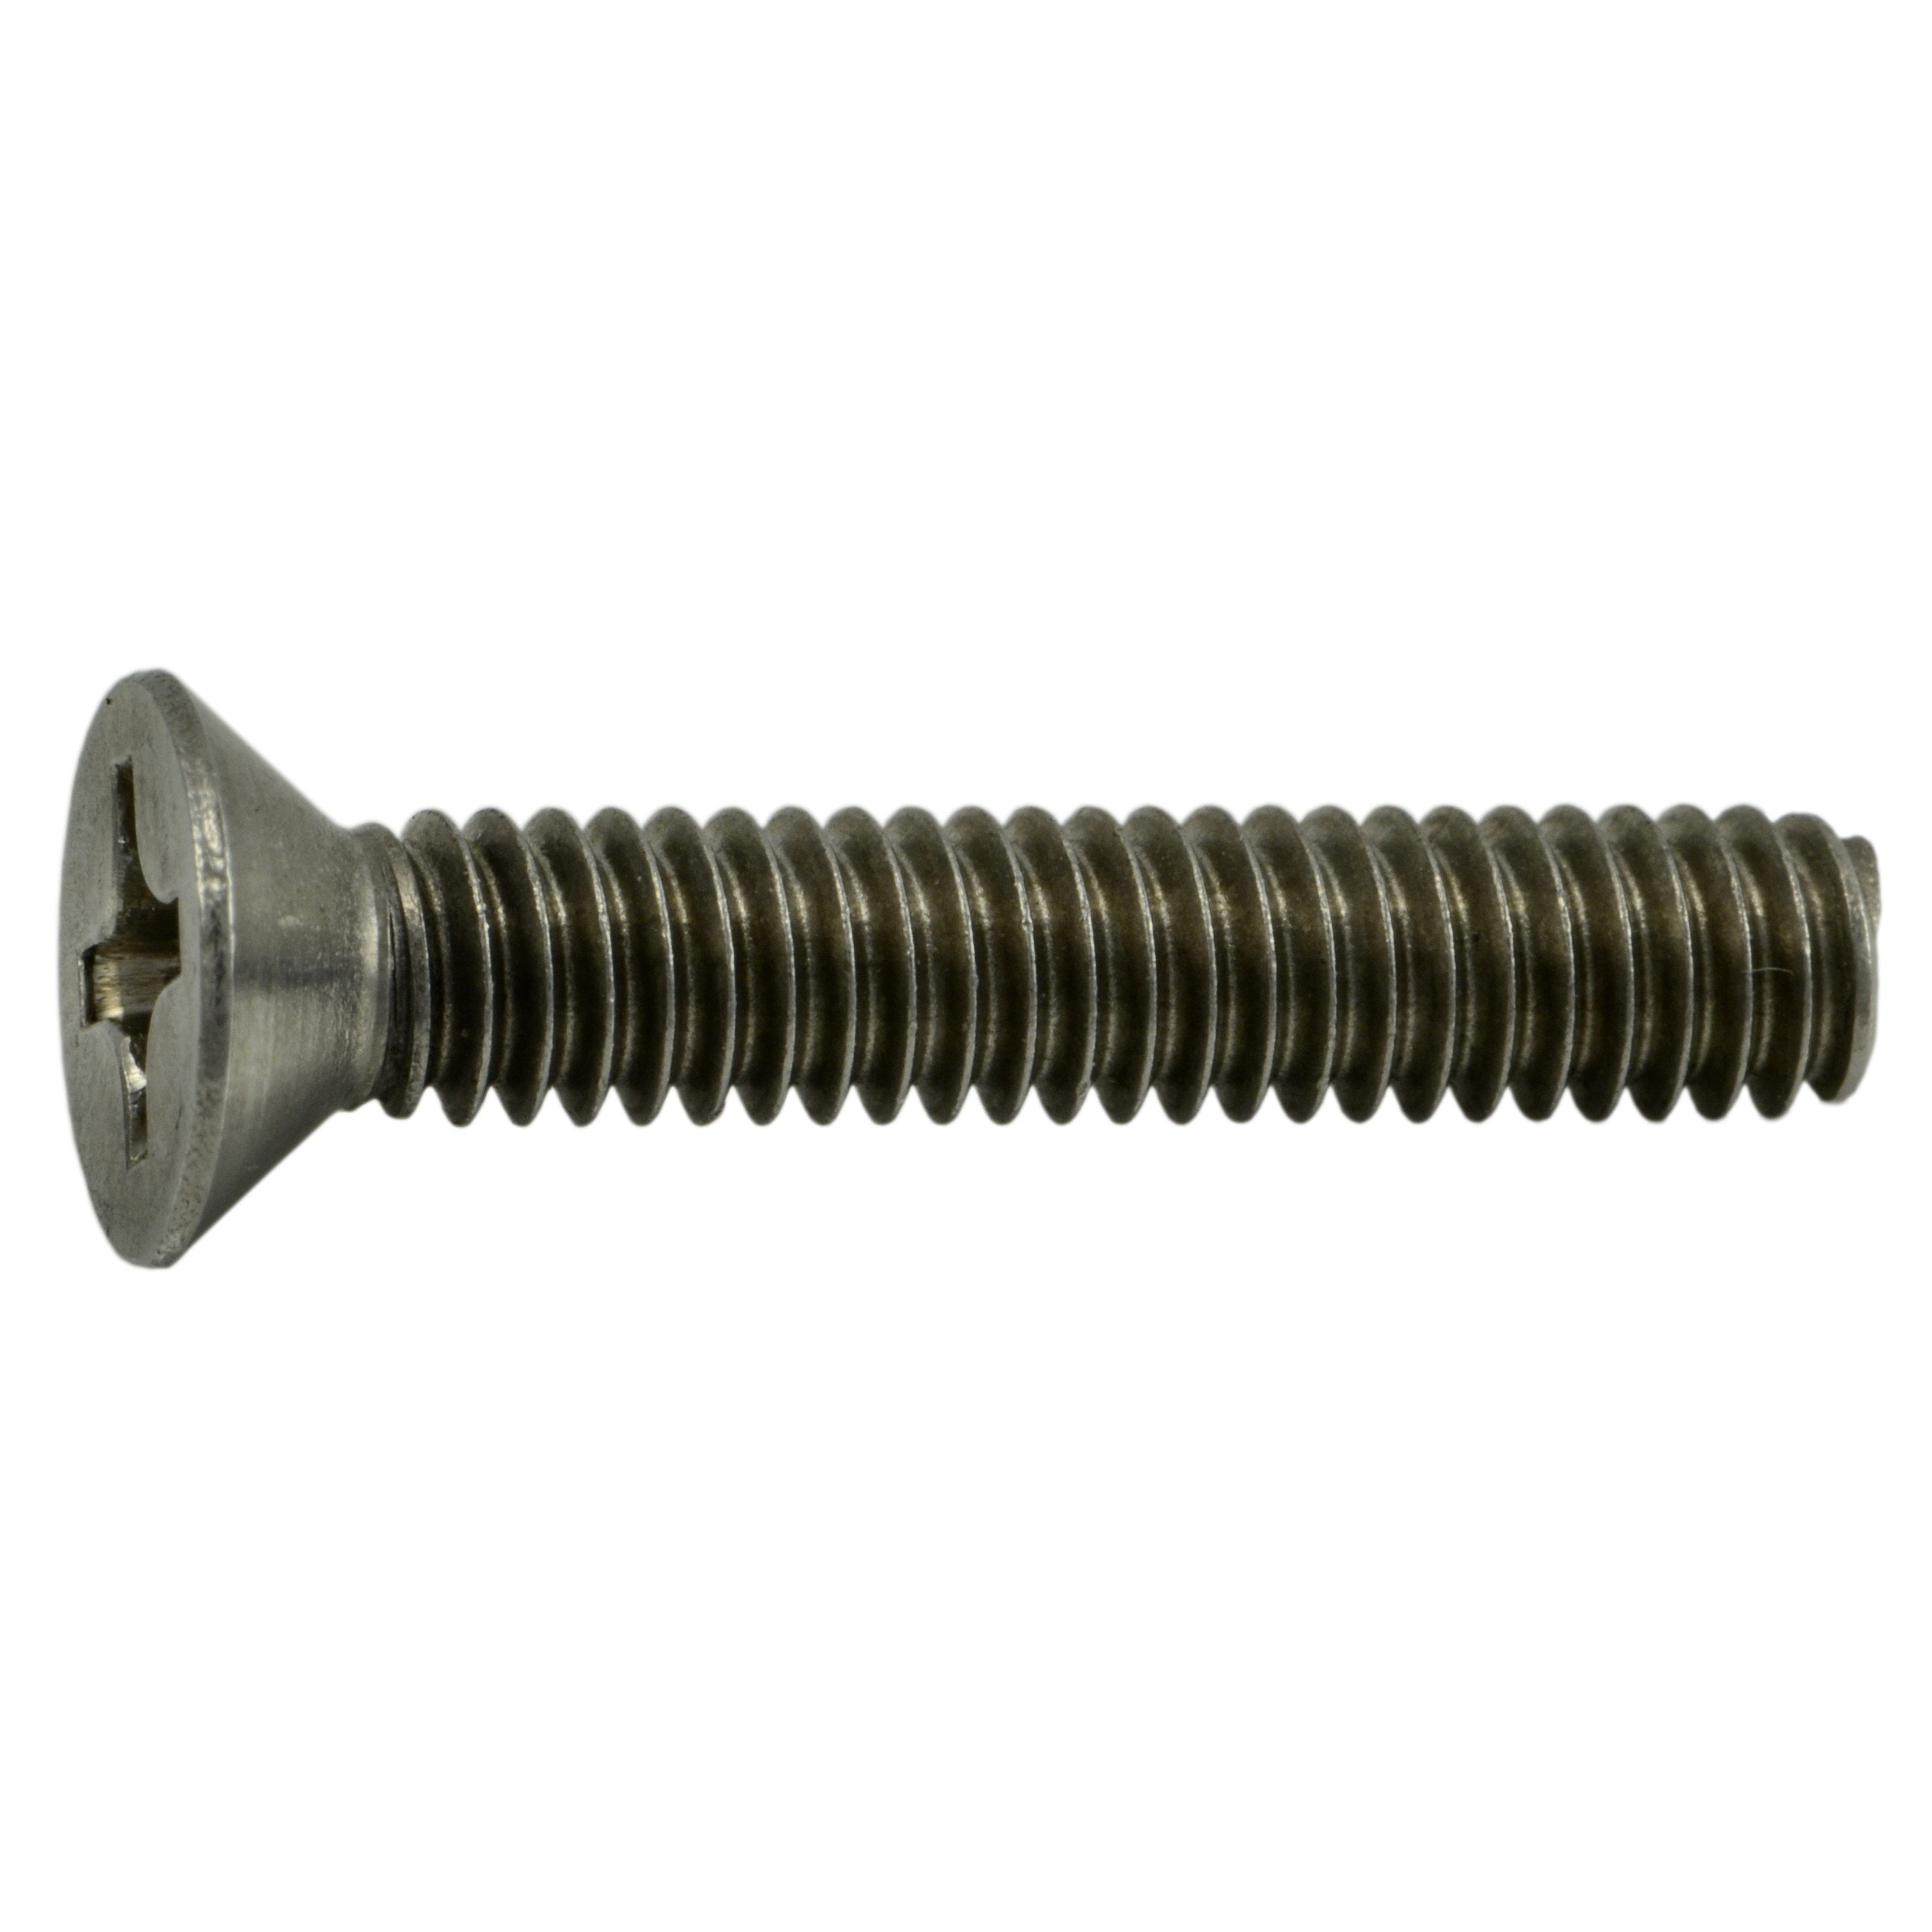 Details about   12-24 x 1-1/4" Flat Head Machine Screws Stainless Steel 18-8 Qty 250 